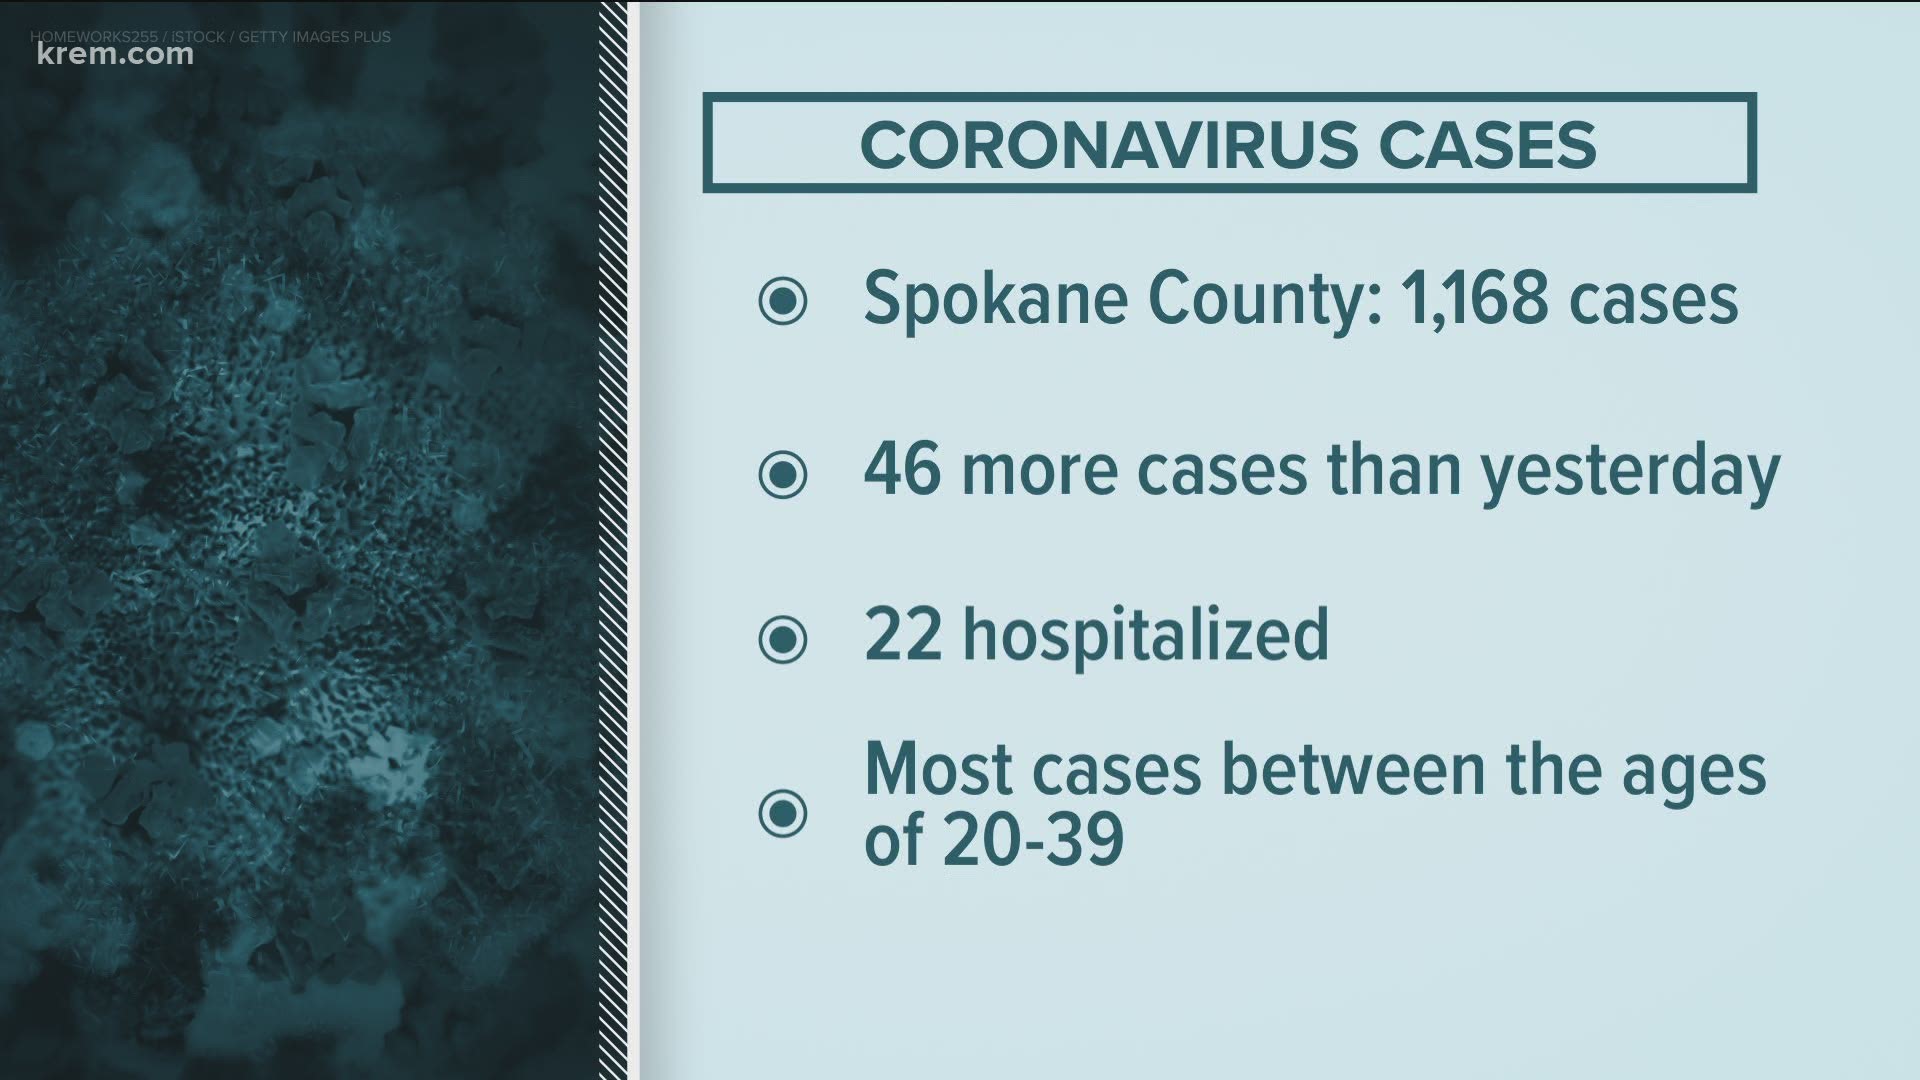 Find daily updates on coronavirus cases in Spokane County and North Idaho and statewide plans for recovery.